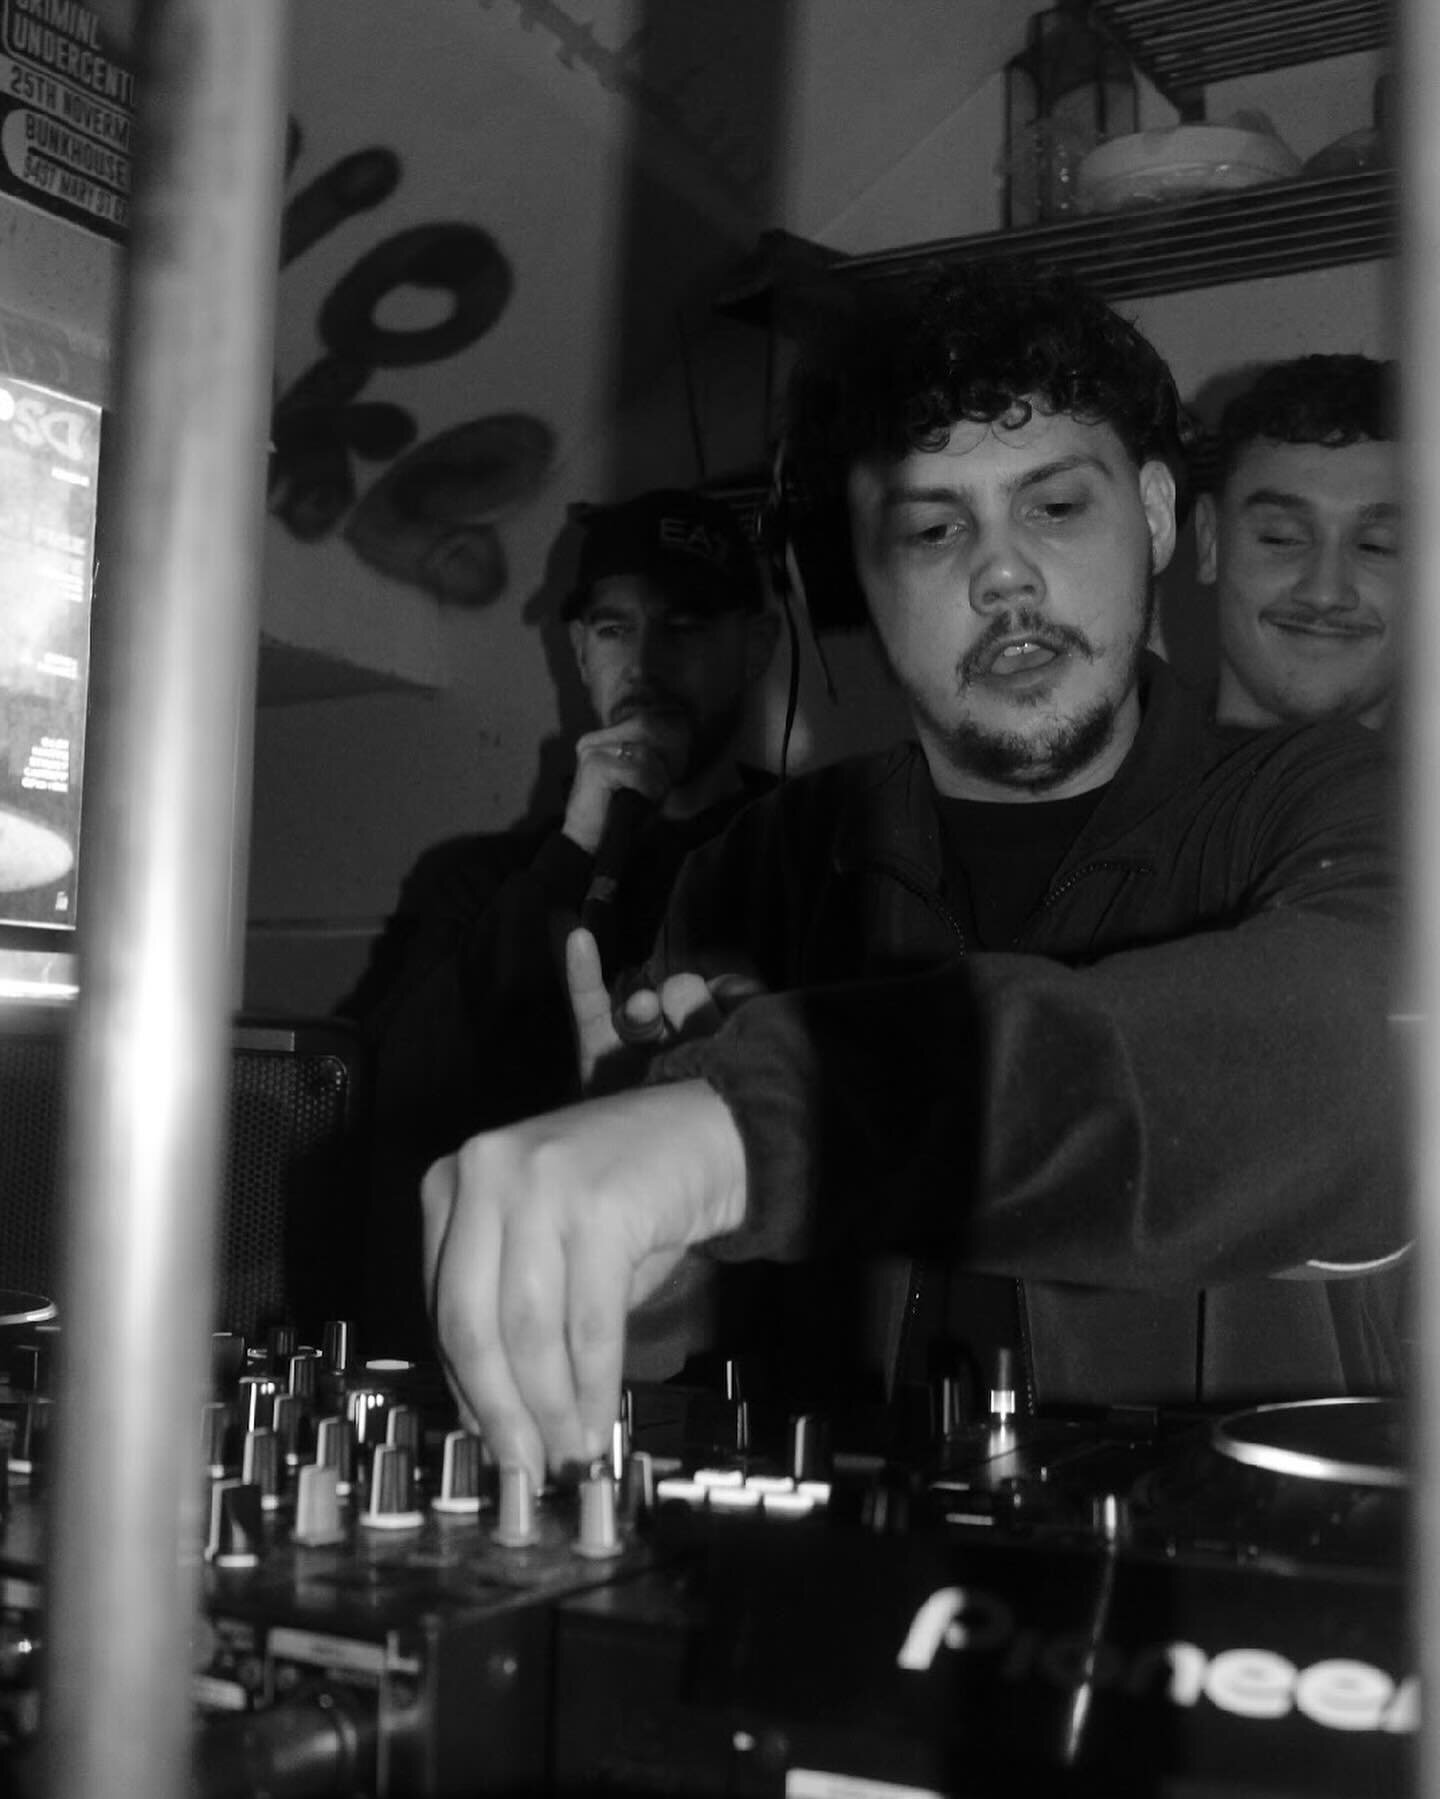 A Few More From Last Weekend With @breaksandbassdnb And @buildupcrew ‼️

📸 @ygheesig 

Roll On This Weekend❤️#dnb #dnbmusic #vibes #drumandbass #event #wales #cardiff #hostel #garage #rap #mc #dj #djlife #music #livemusic #rugby #bunkhouse